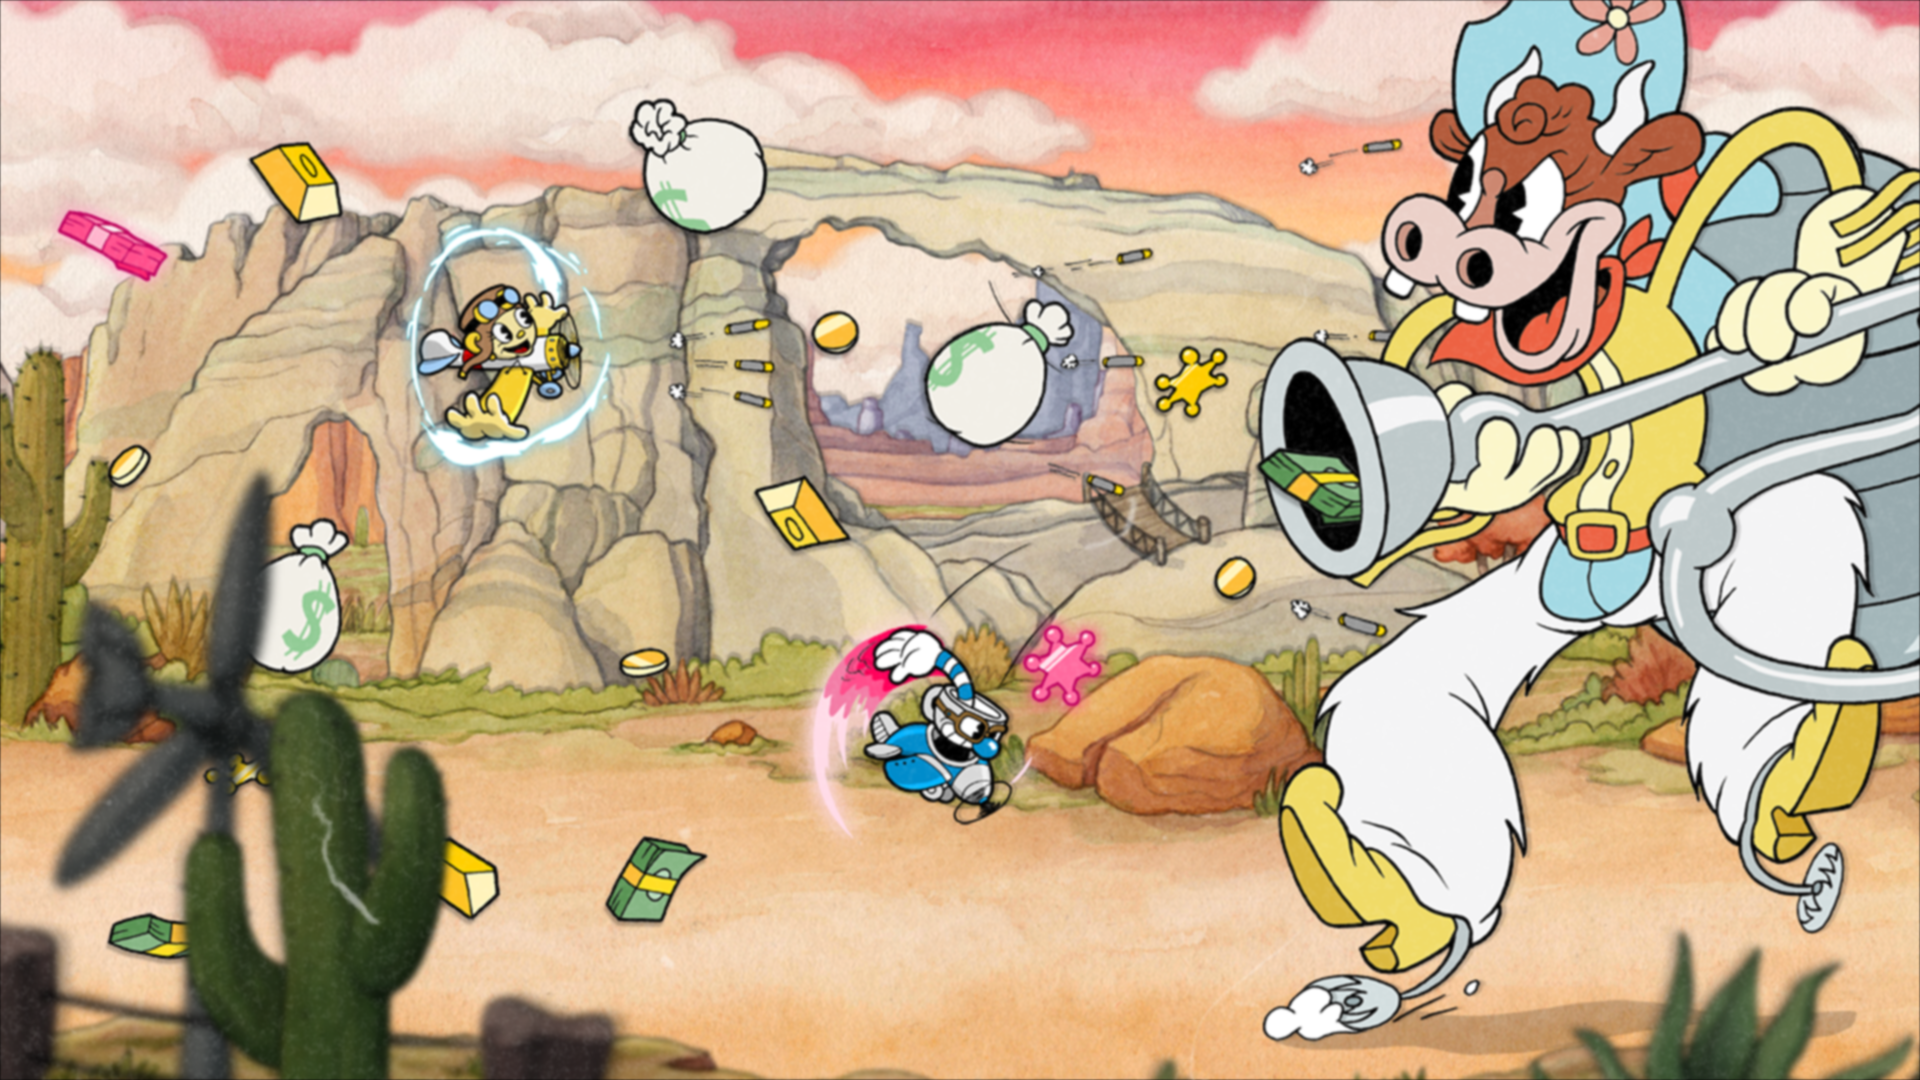 Video game screenshot of a cartoon cow dressed as a cowboy shooting a big gun at another character in a small blue airplane